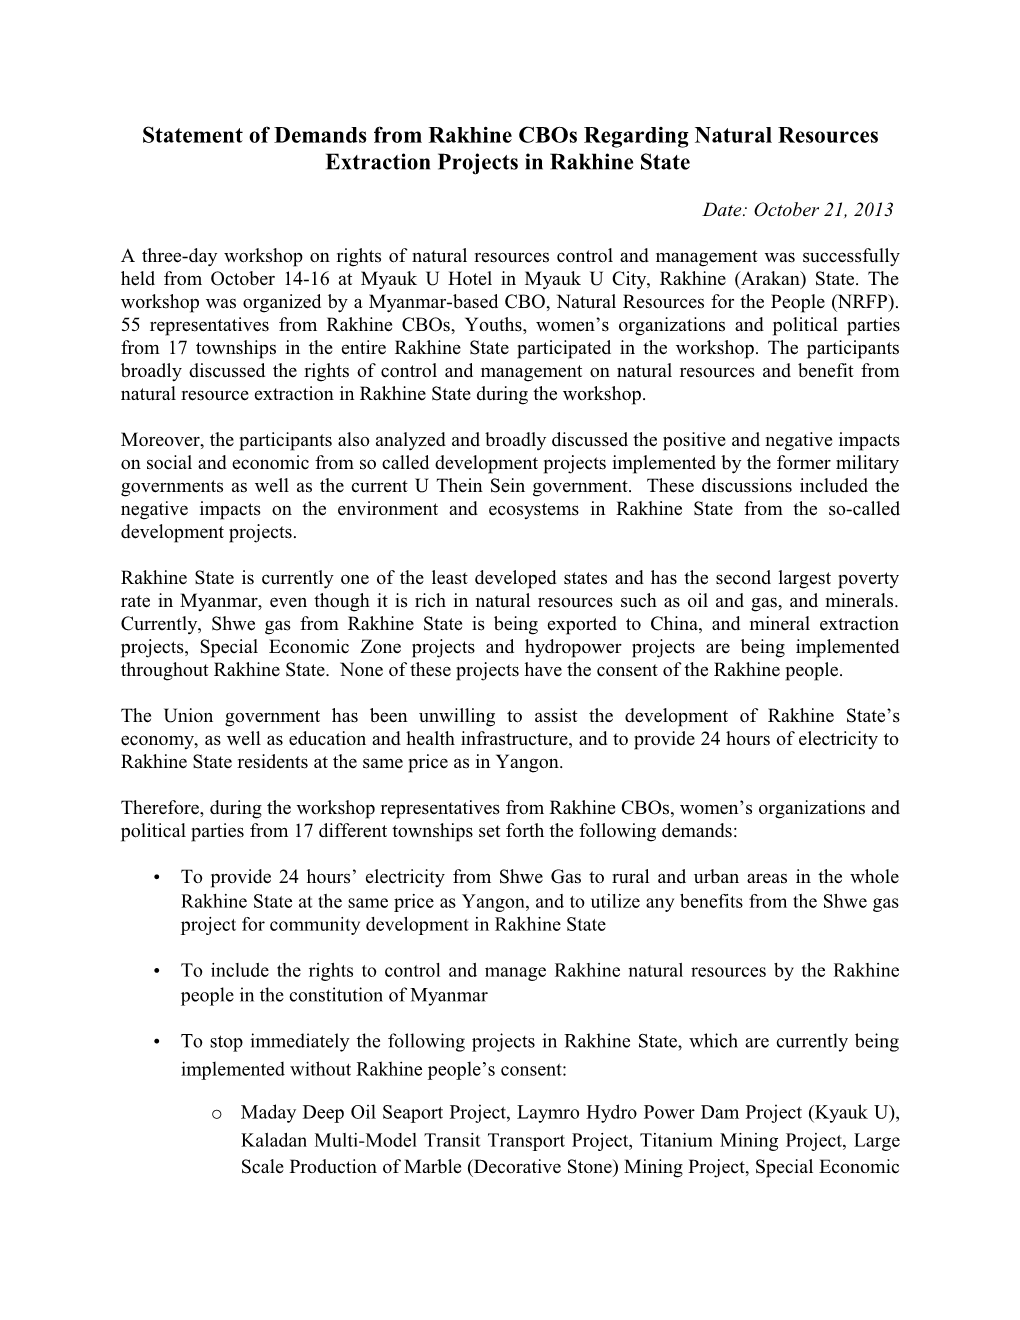 Statement of Demands from Rakhine Cbos Regarding Natural Resources Extraction Projects